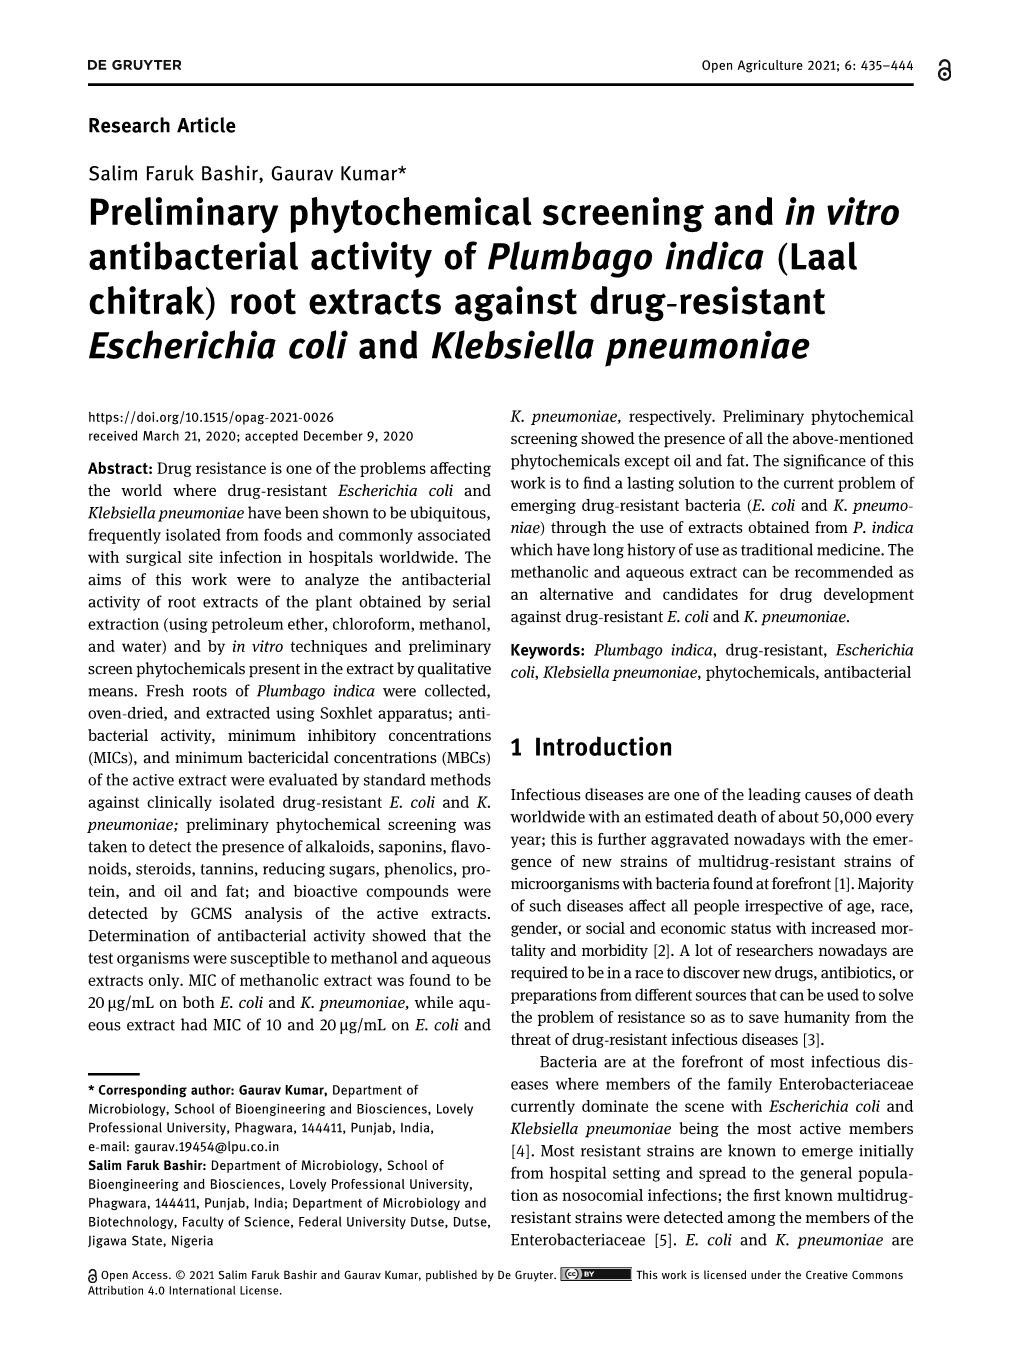 Preliminary Phytochemical Screening and in Vitro Antibacterial Activity Of